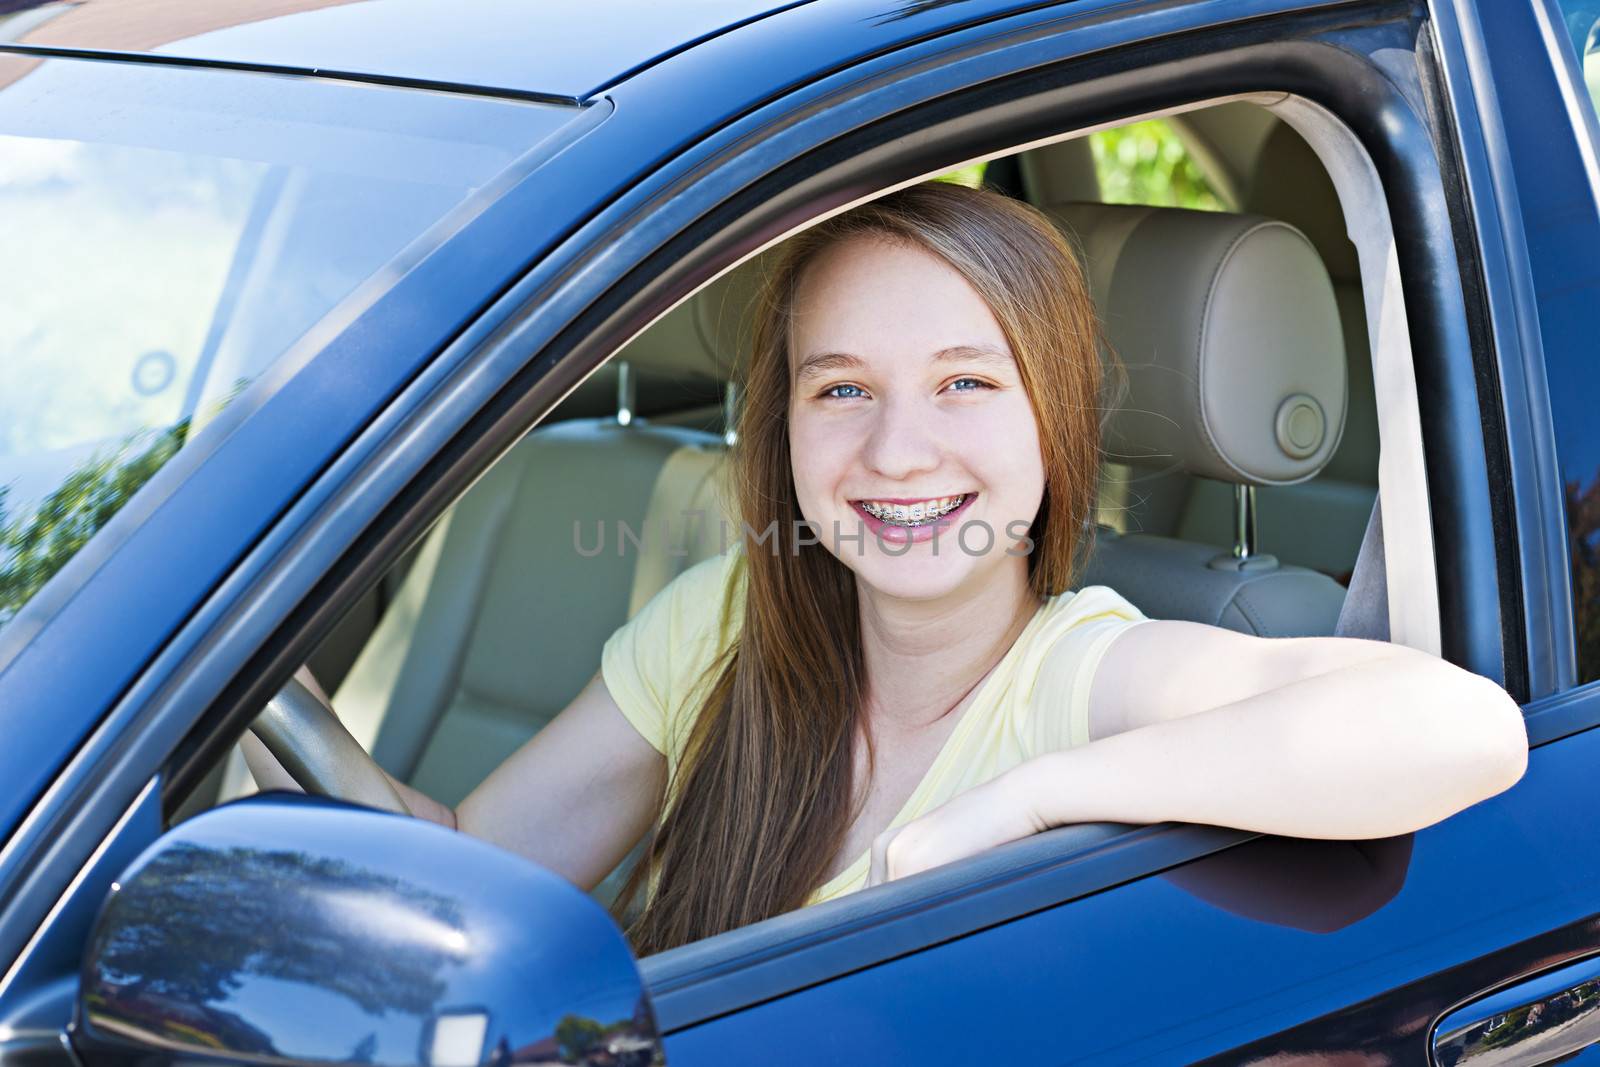 Teenage female driving student learning to drive a car